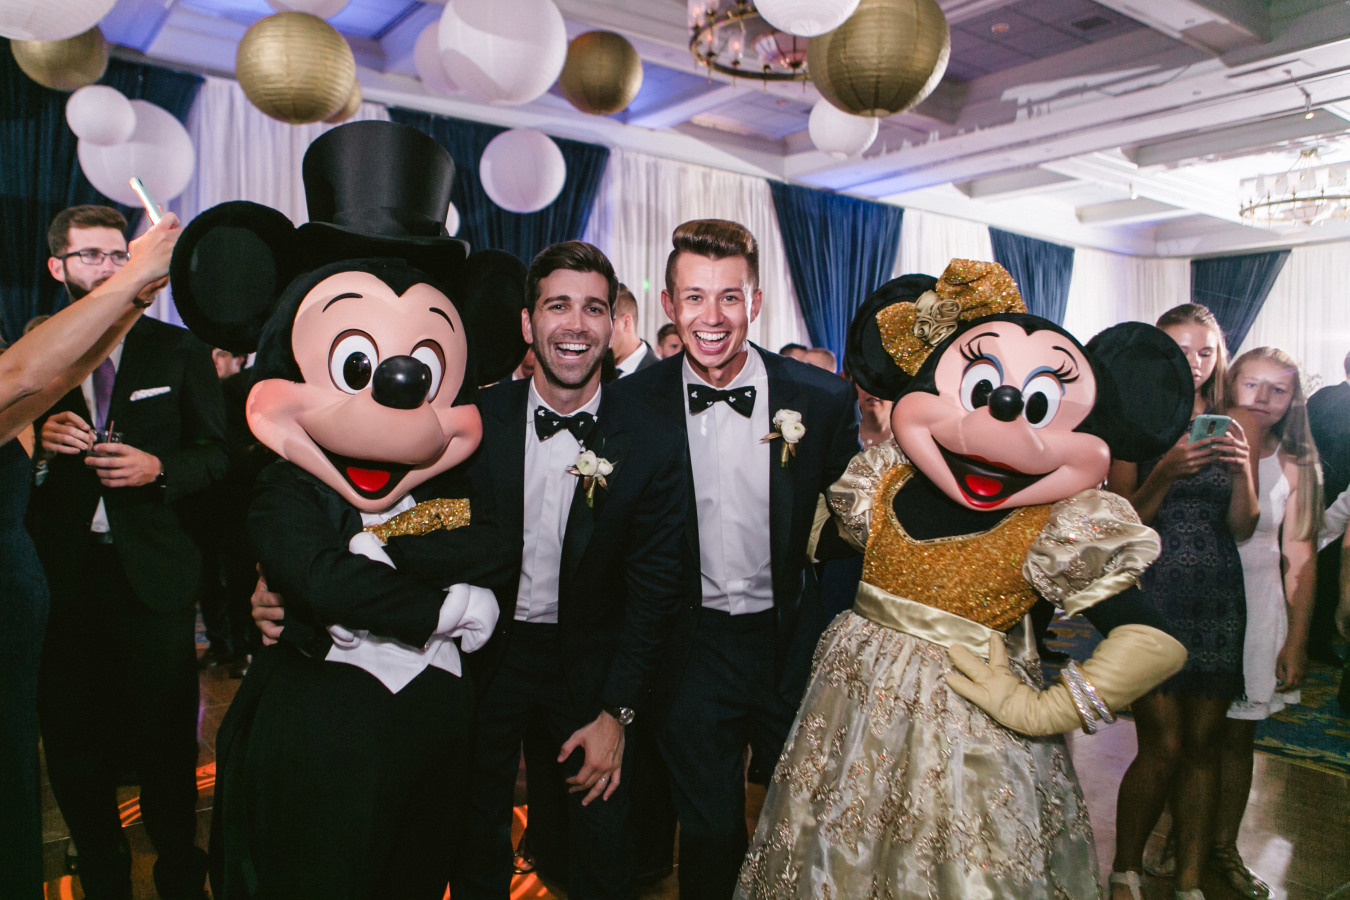 Of course Minnie and Mickey Mouse were guests at the reception and the party